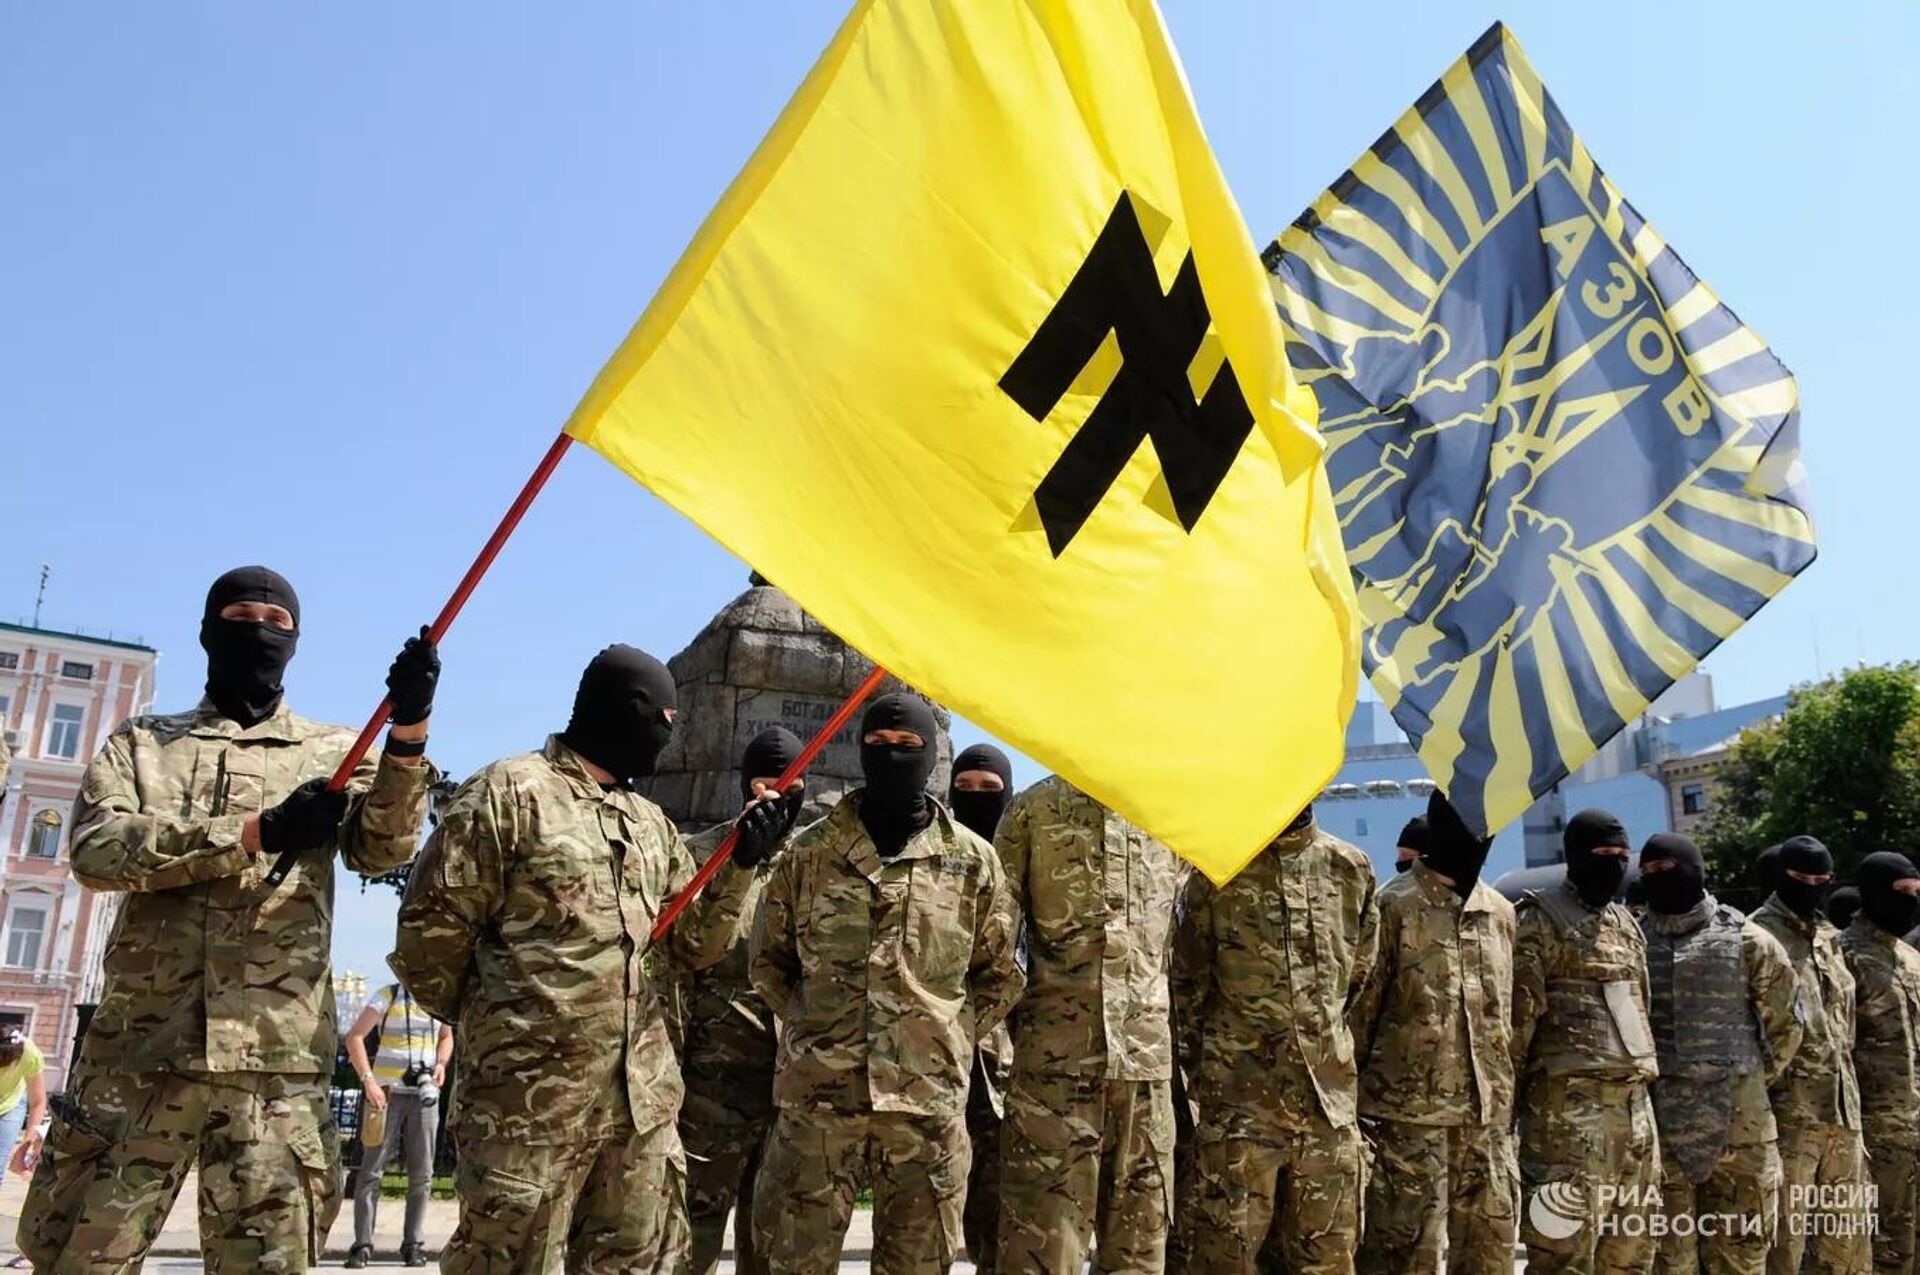 Fighters of the neo-Nazi Azov Battalion take the oath of allegiance to Ukraine in Sophia Square in Kiev before being sent to Donbass. Members of the Nazi battalion have committed hundreds of war crimes against the population of Donbass over eight years. The Azov flag has an inverted image of the runic symbol “Wolfsangel”, which was used by the Nazis. - Sputnik International, 1920, 13.11.2022